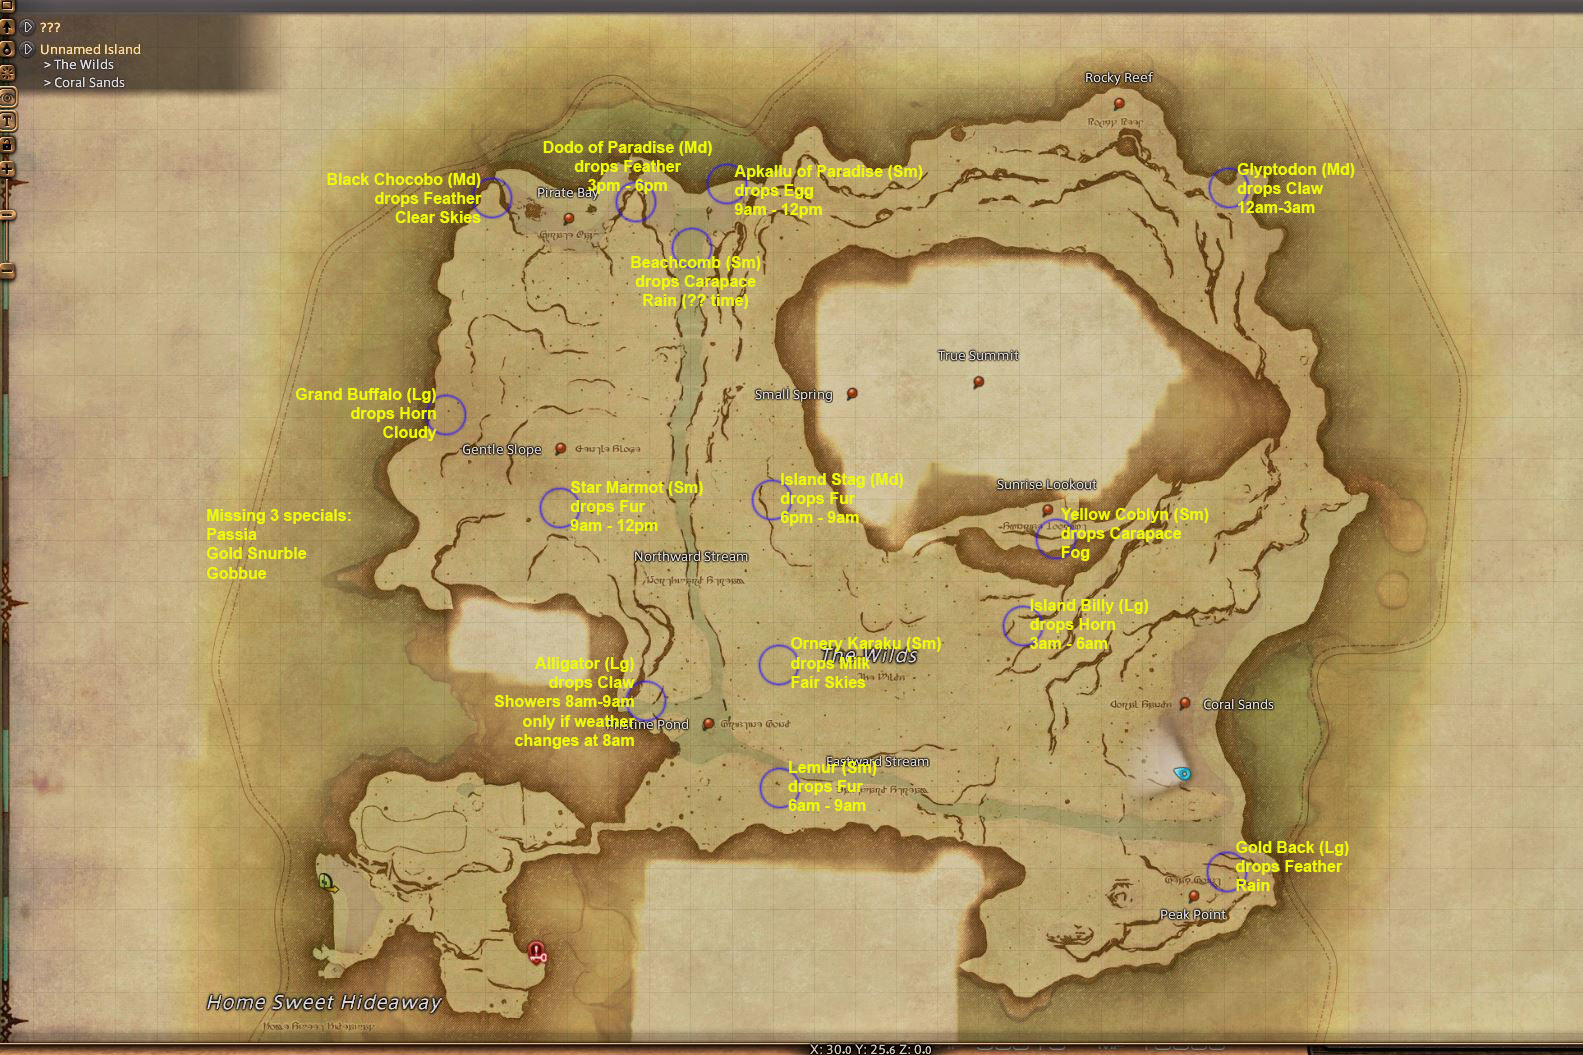 Dodo feathers map